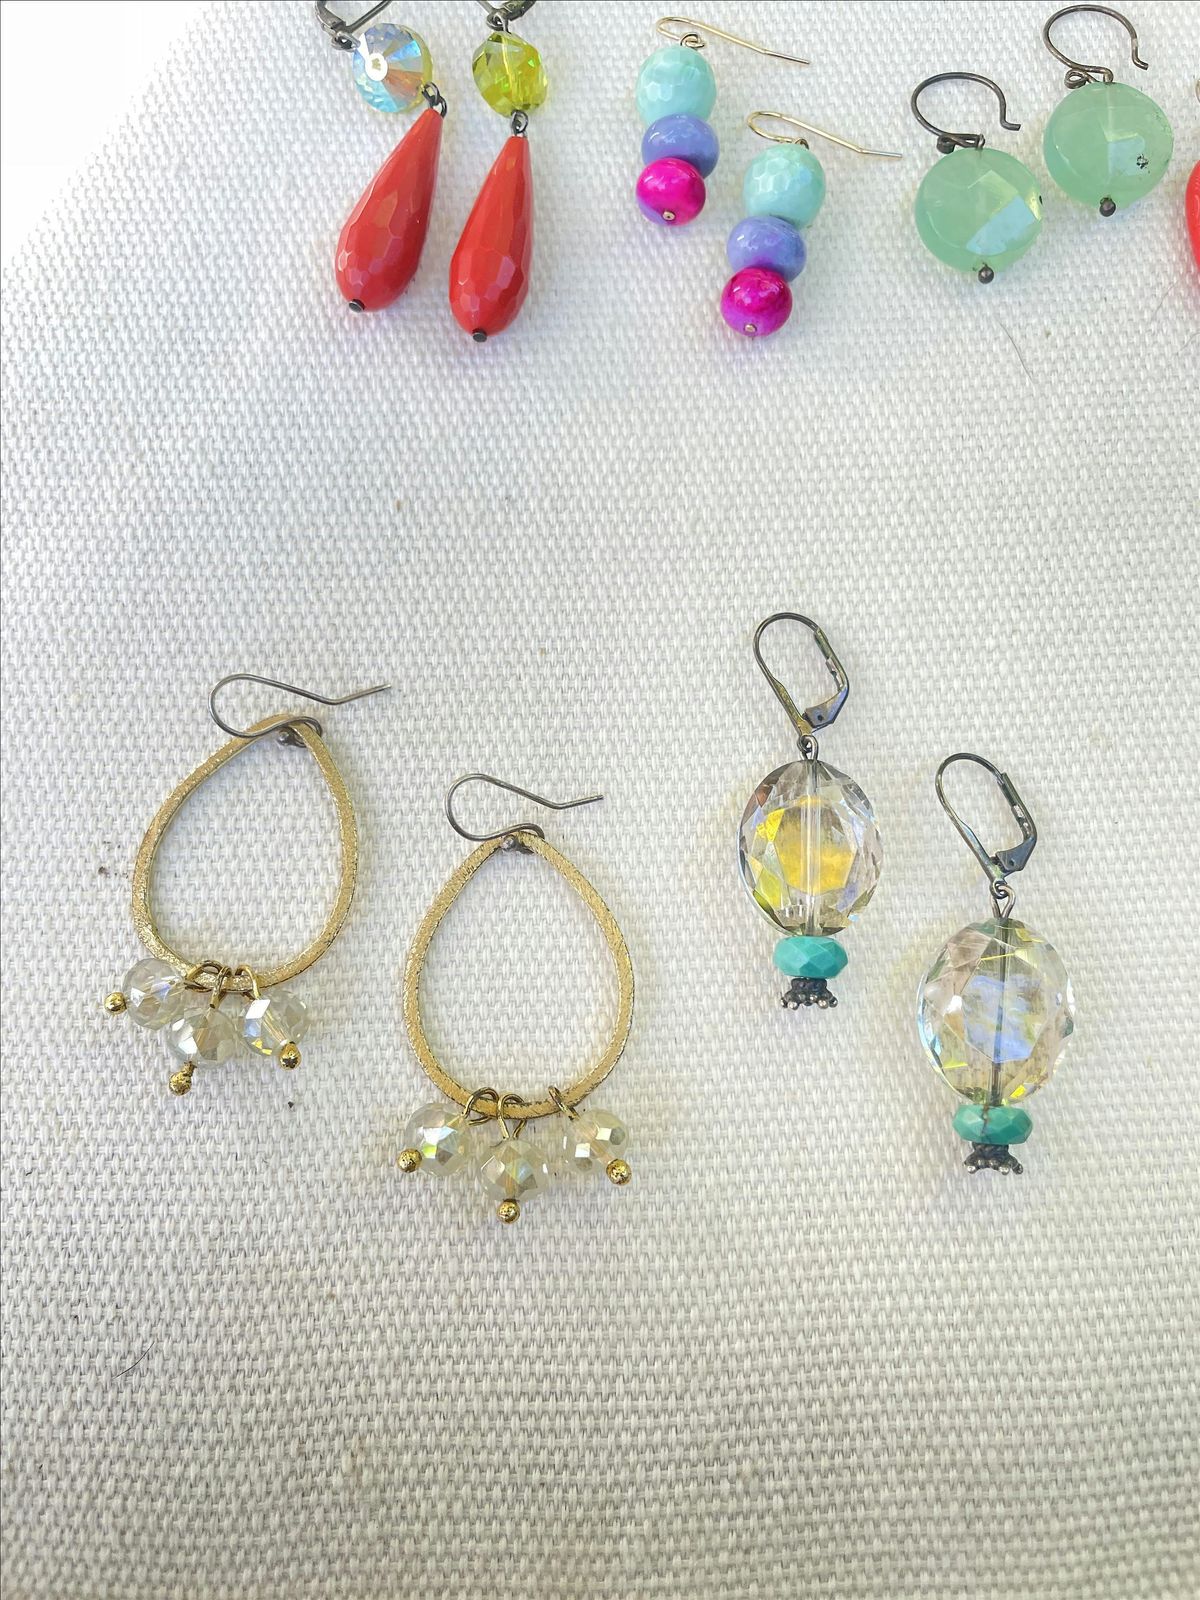 Project Workshop: Make 2 pairs of Earrings